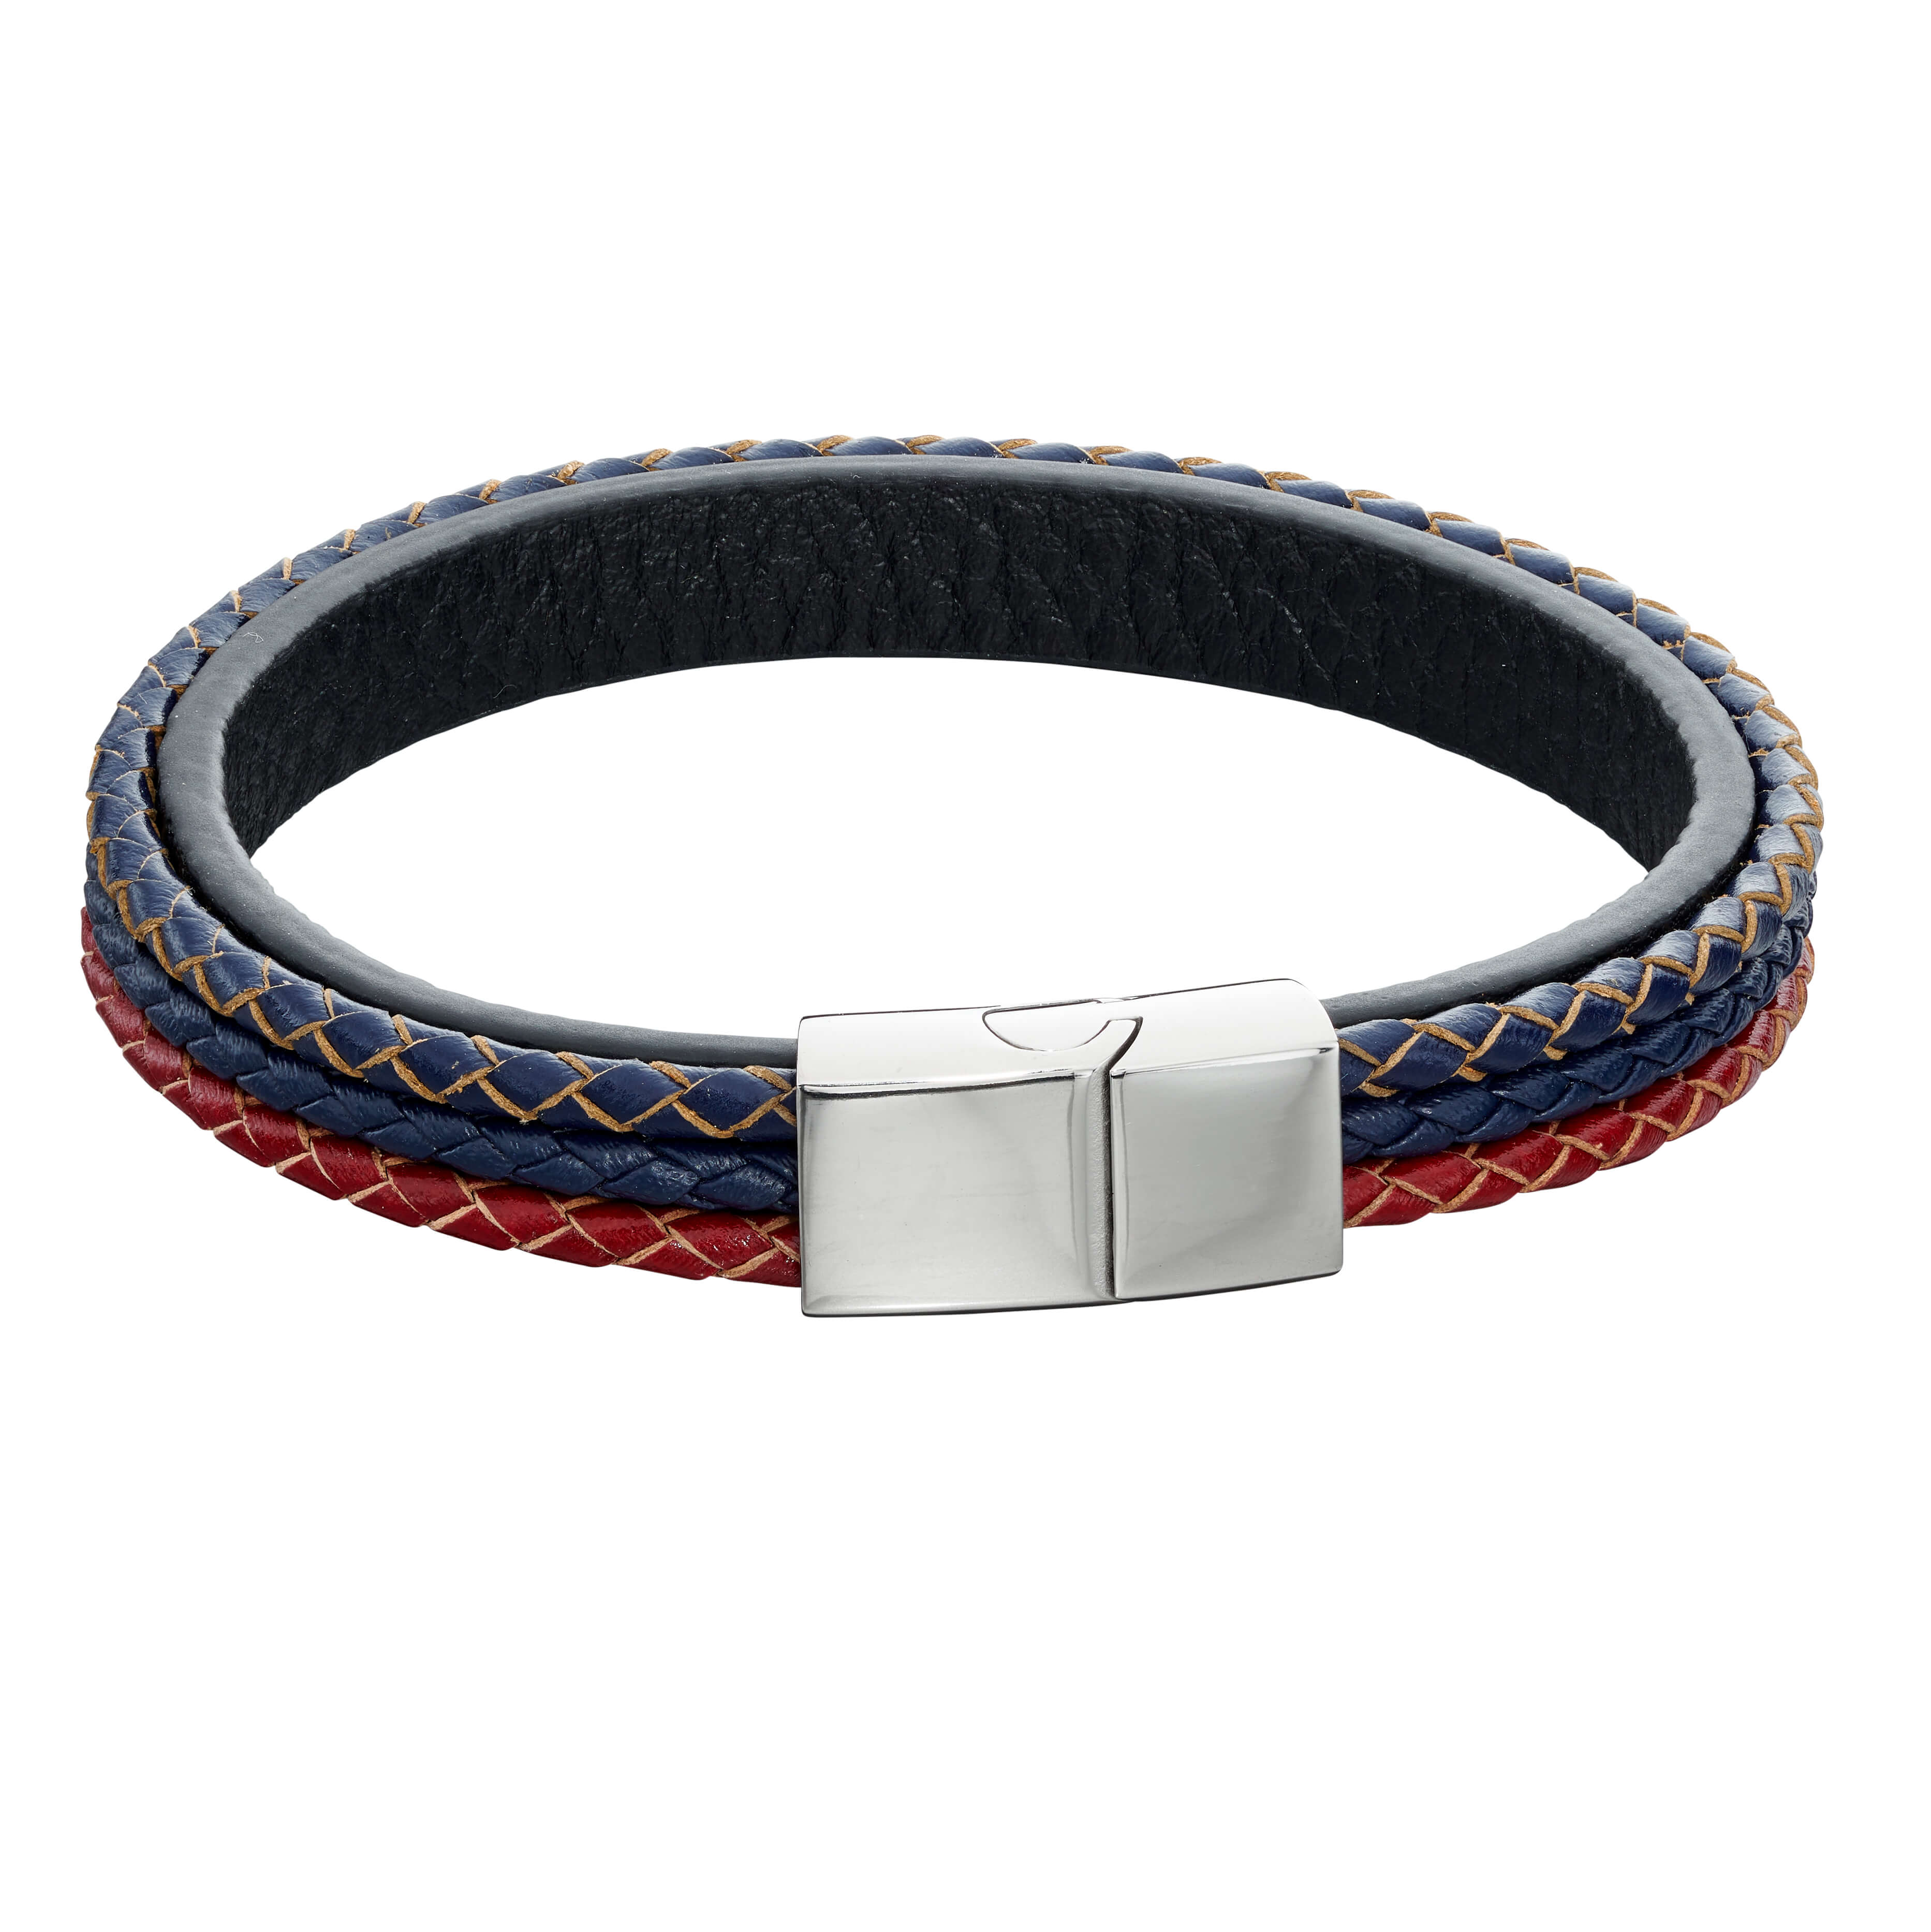 Stainless Steel with Blue, Red & Grey Woven Leather Bracelet - FB0008 - Hallmark Jewellers Formby & The Jewellers Bench Widnes